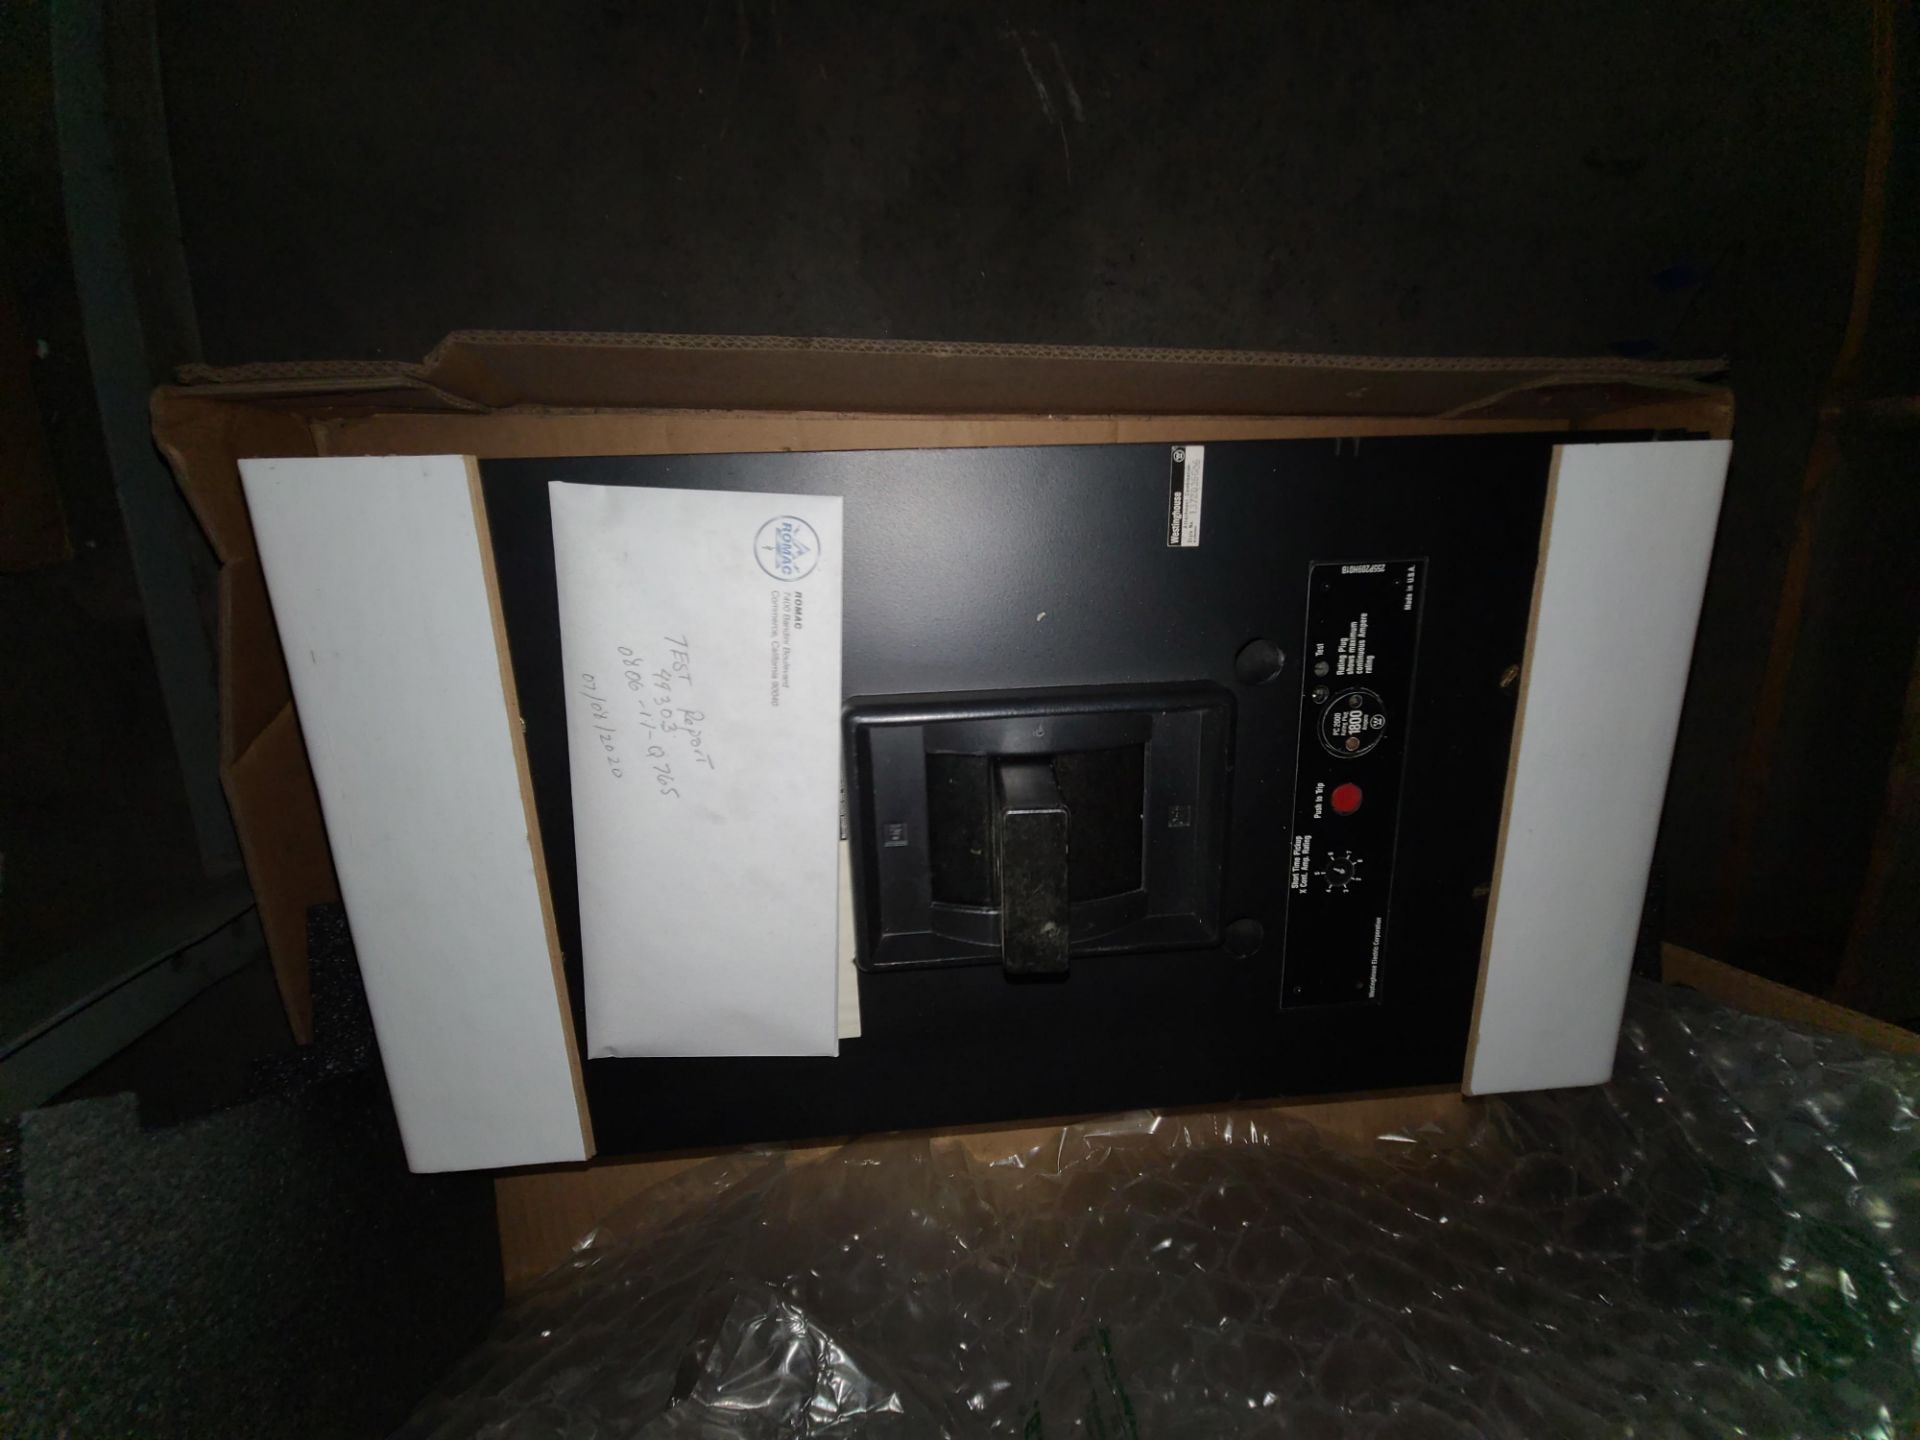 mod. PC32000 Breaker, 0806-17-Q765 (Reconditioned) (LOADING FEES: $15) - Image 2 of 2